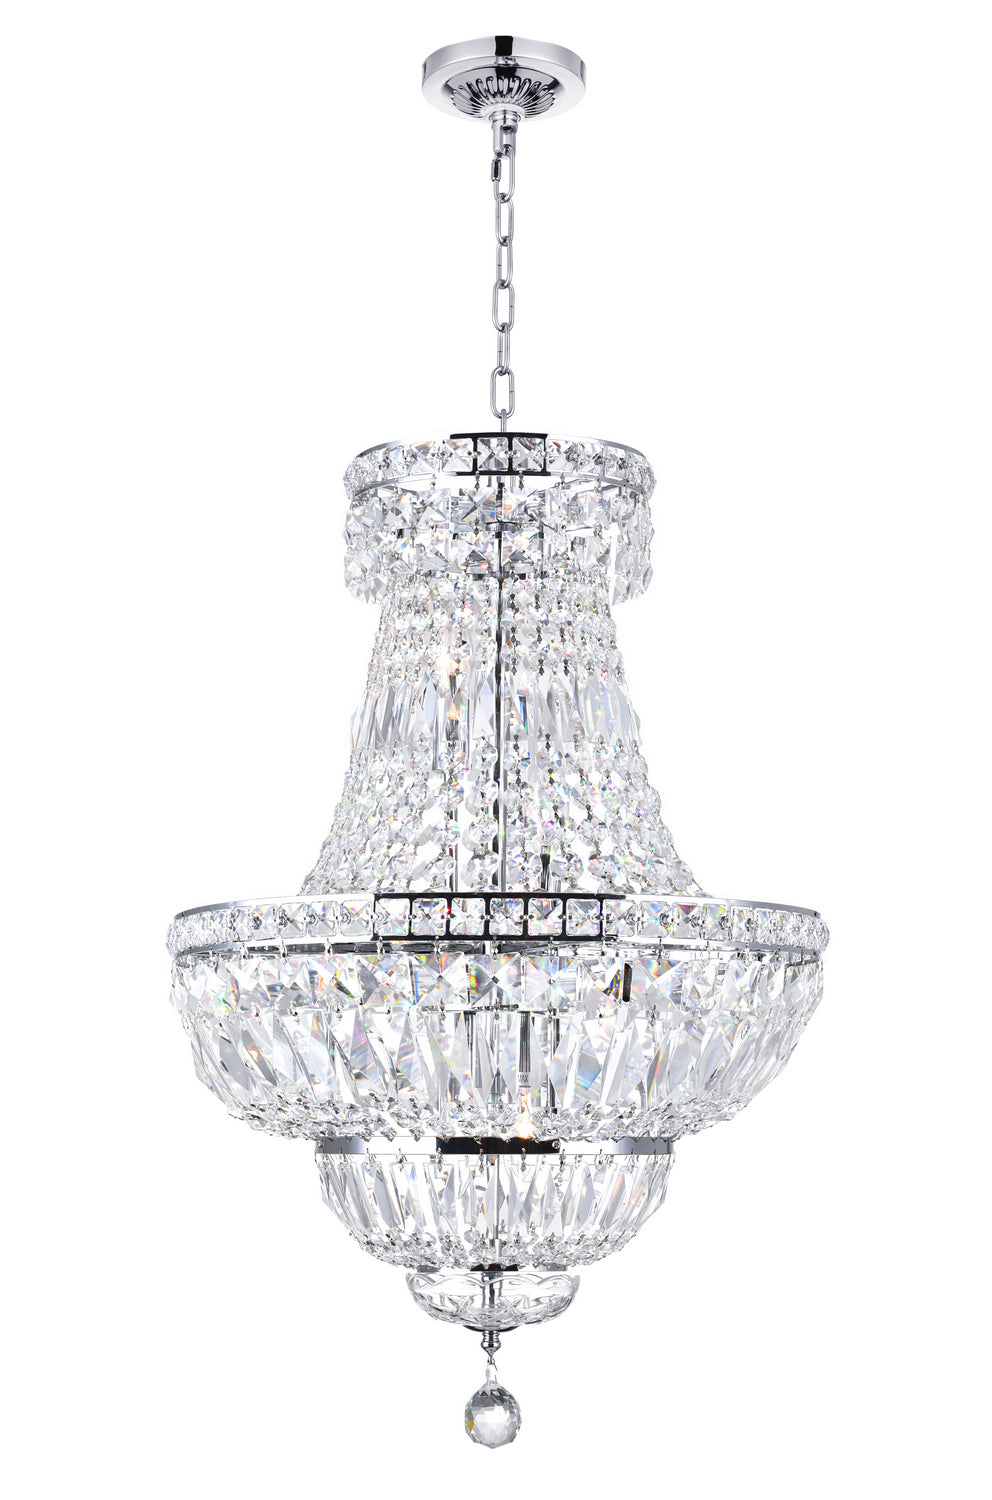 CWI Lighting Eight Light Chandelier from the Stefania collection in Chrome finish